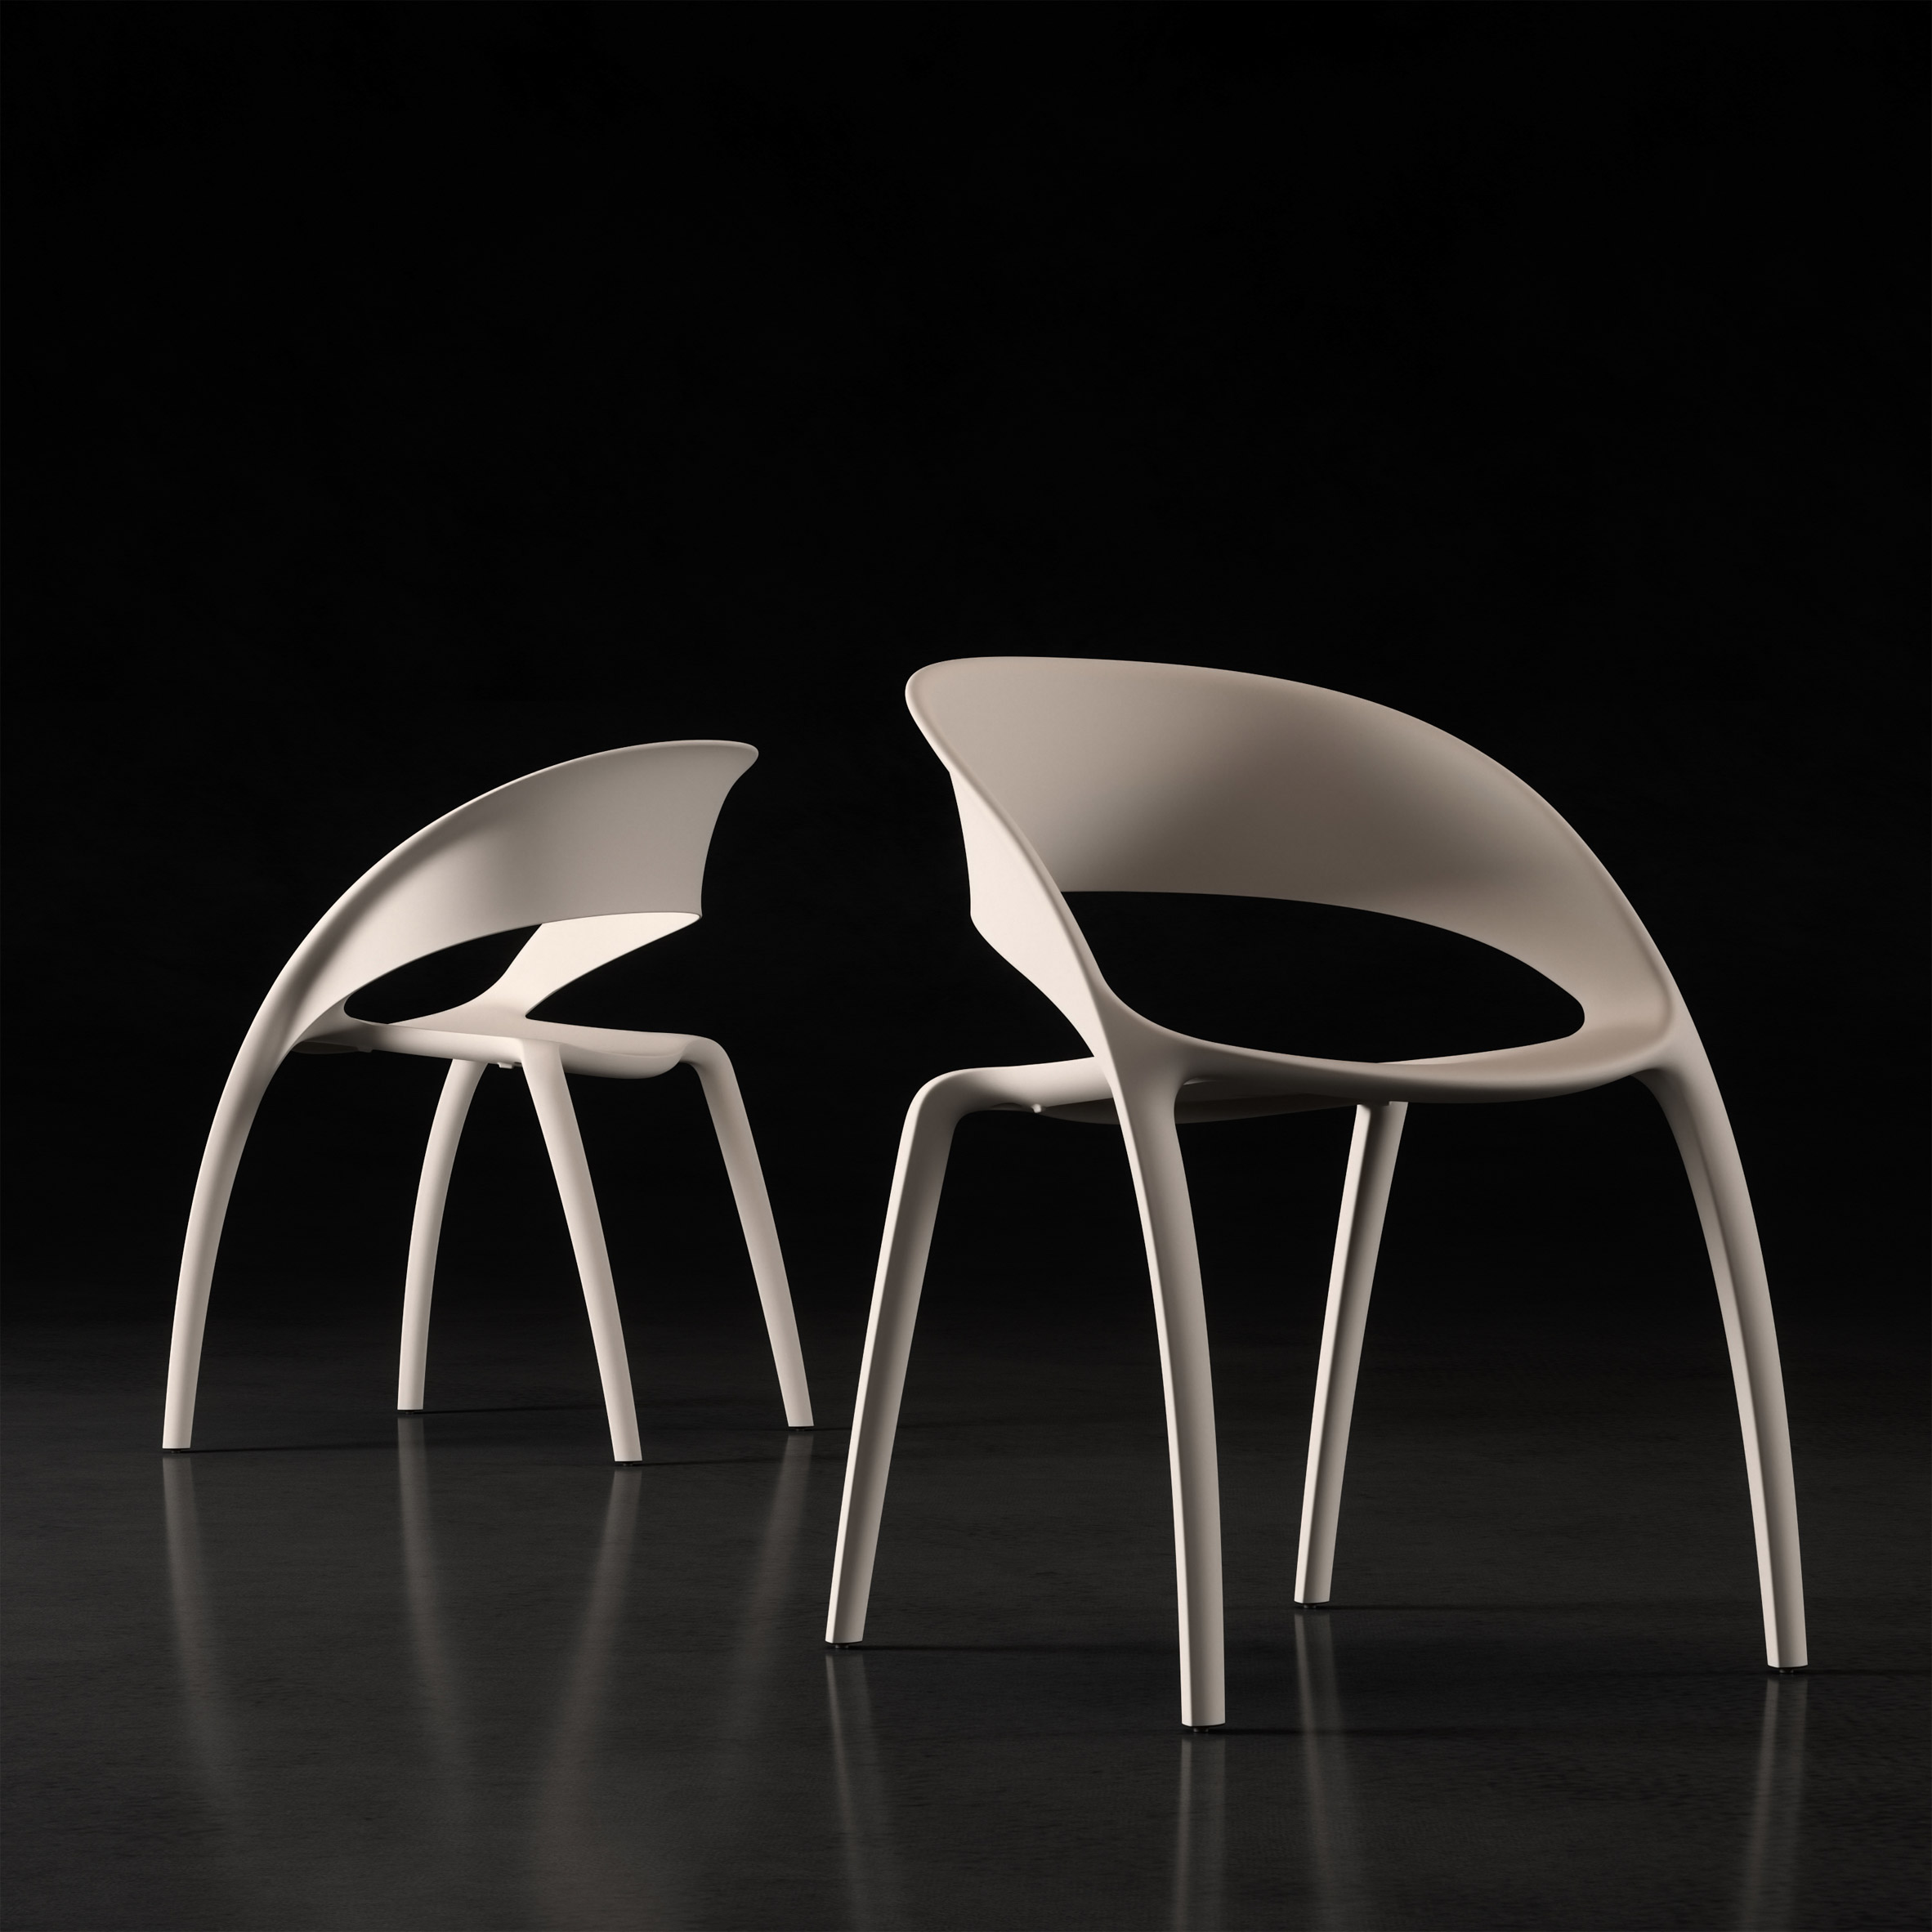 Two cream Bee chairs by Actiu with a curved backrest extending to form two front legs